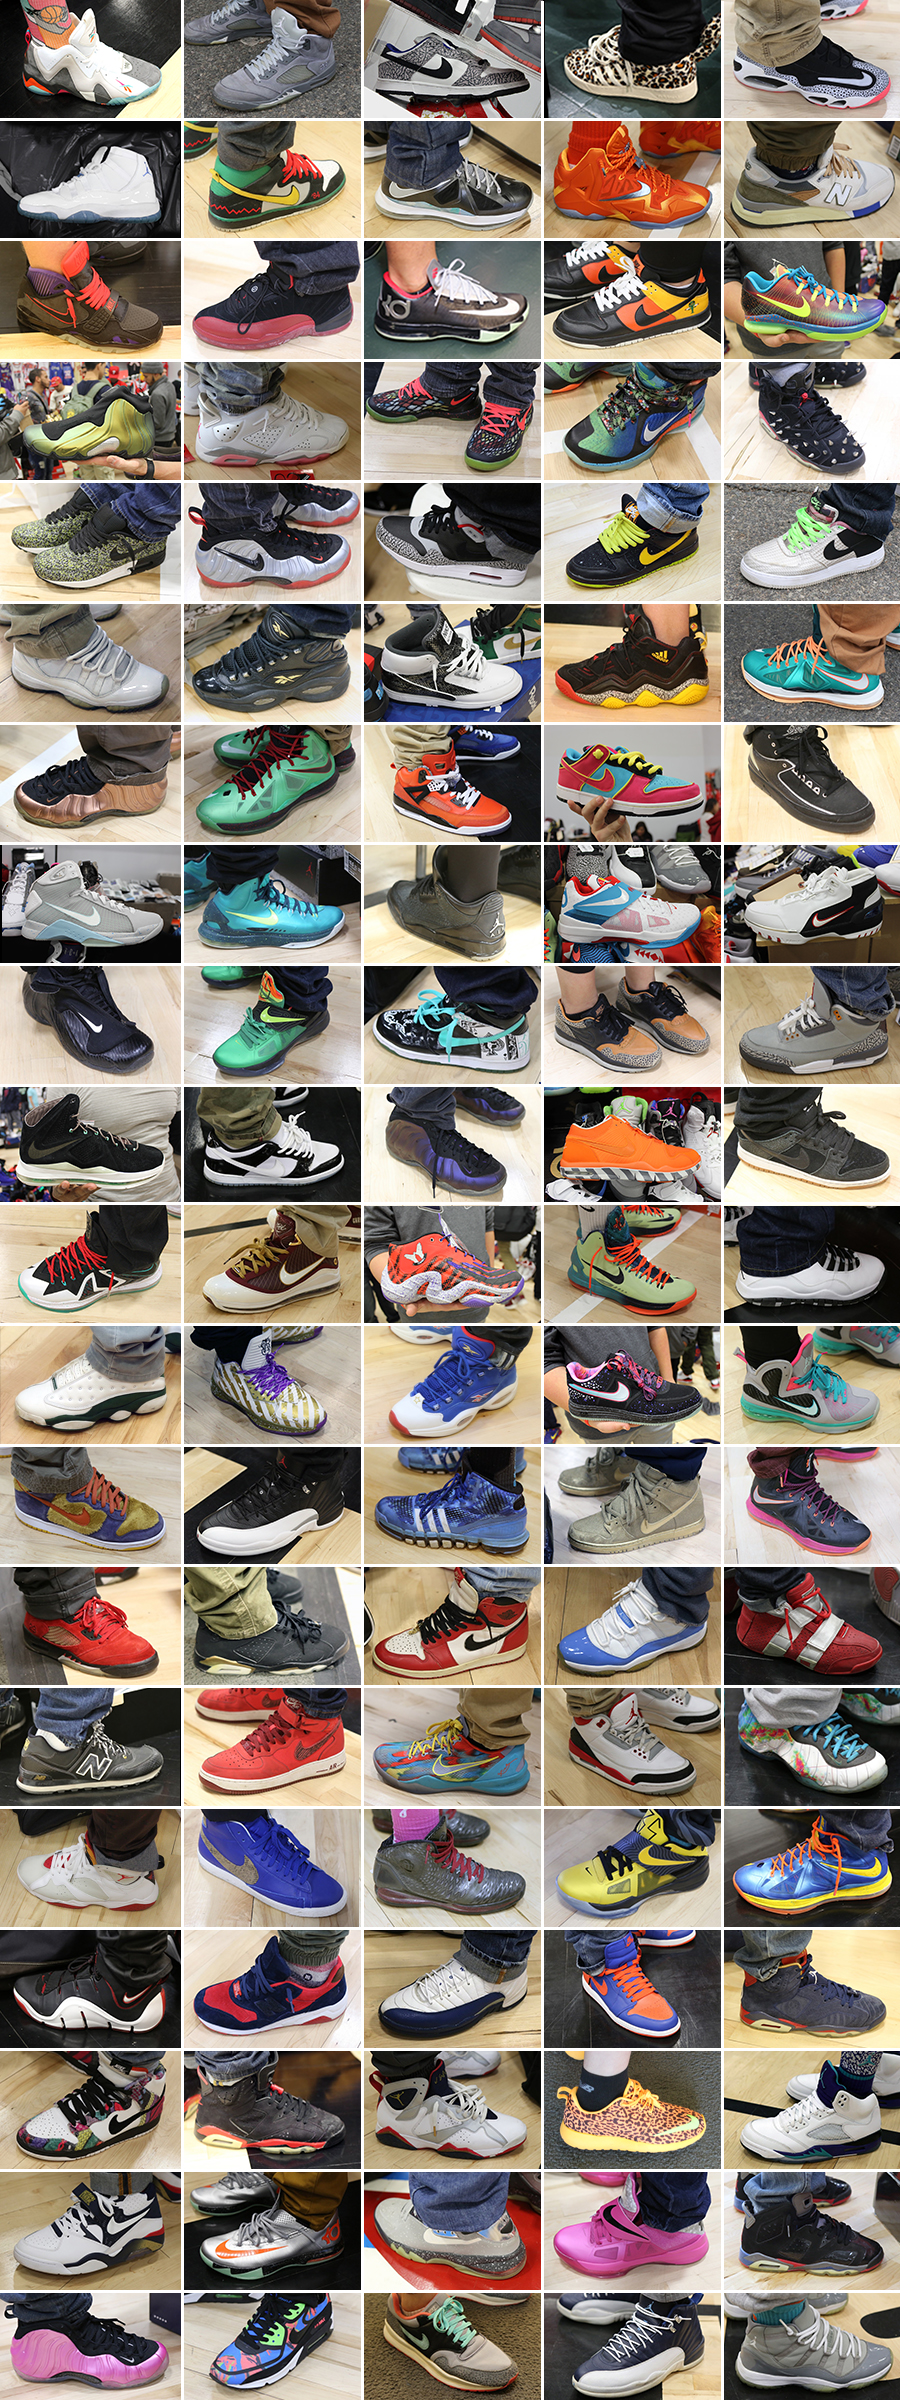 500 Shoes At Sneaker Con 01